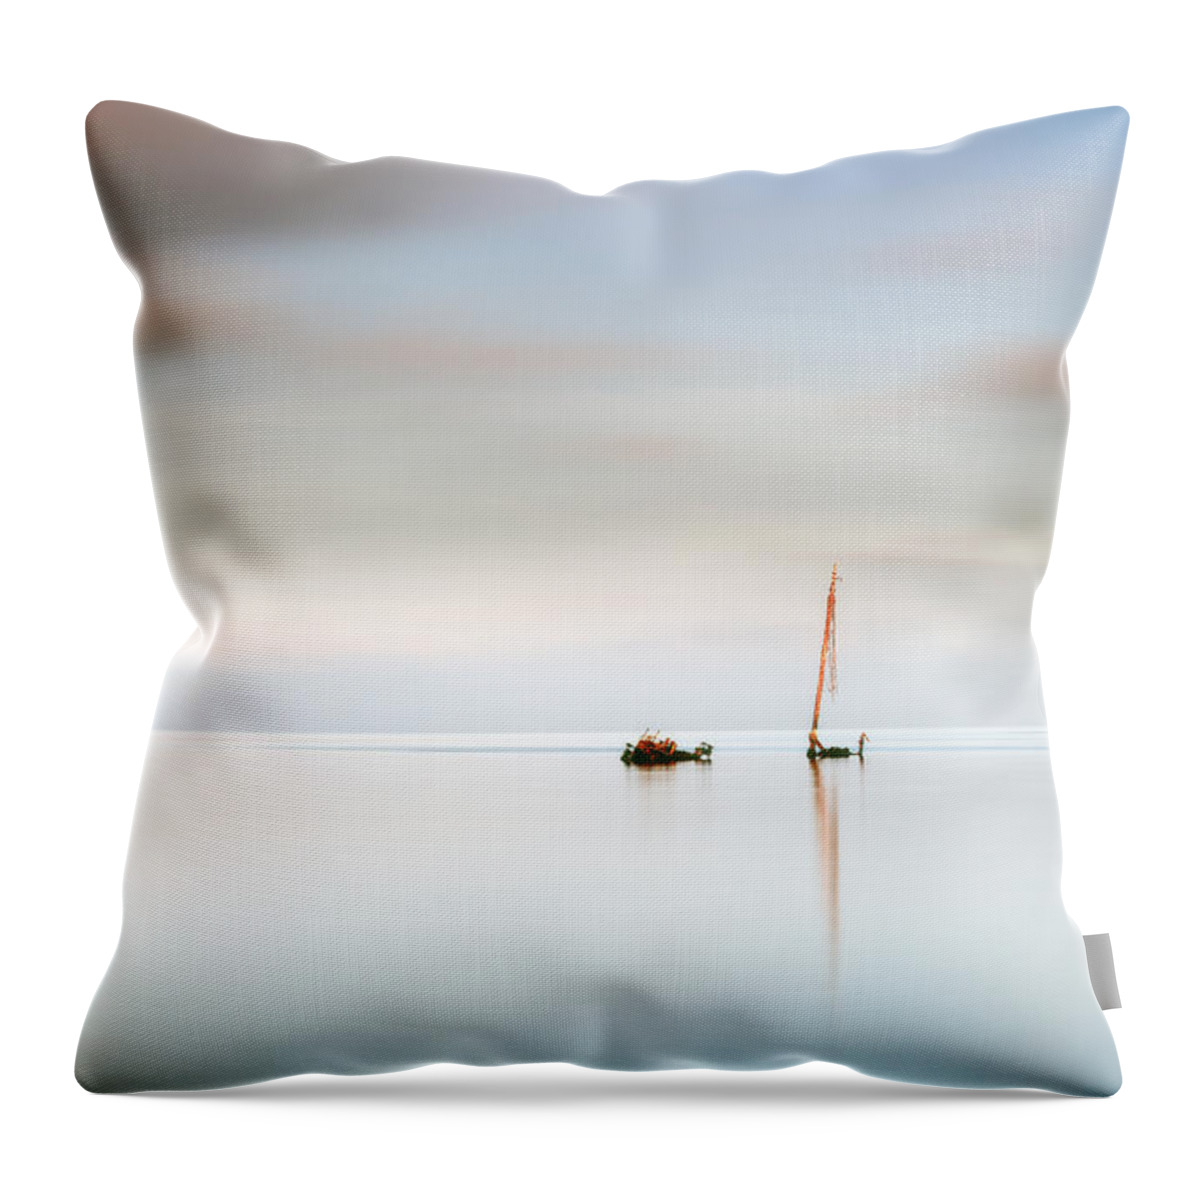 Shipwreck Throw Pillow featuring the photograph Ayrshire Coast Flat Calm Shipwreck by Grant Glendinning